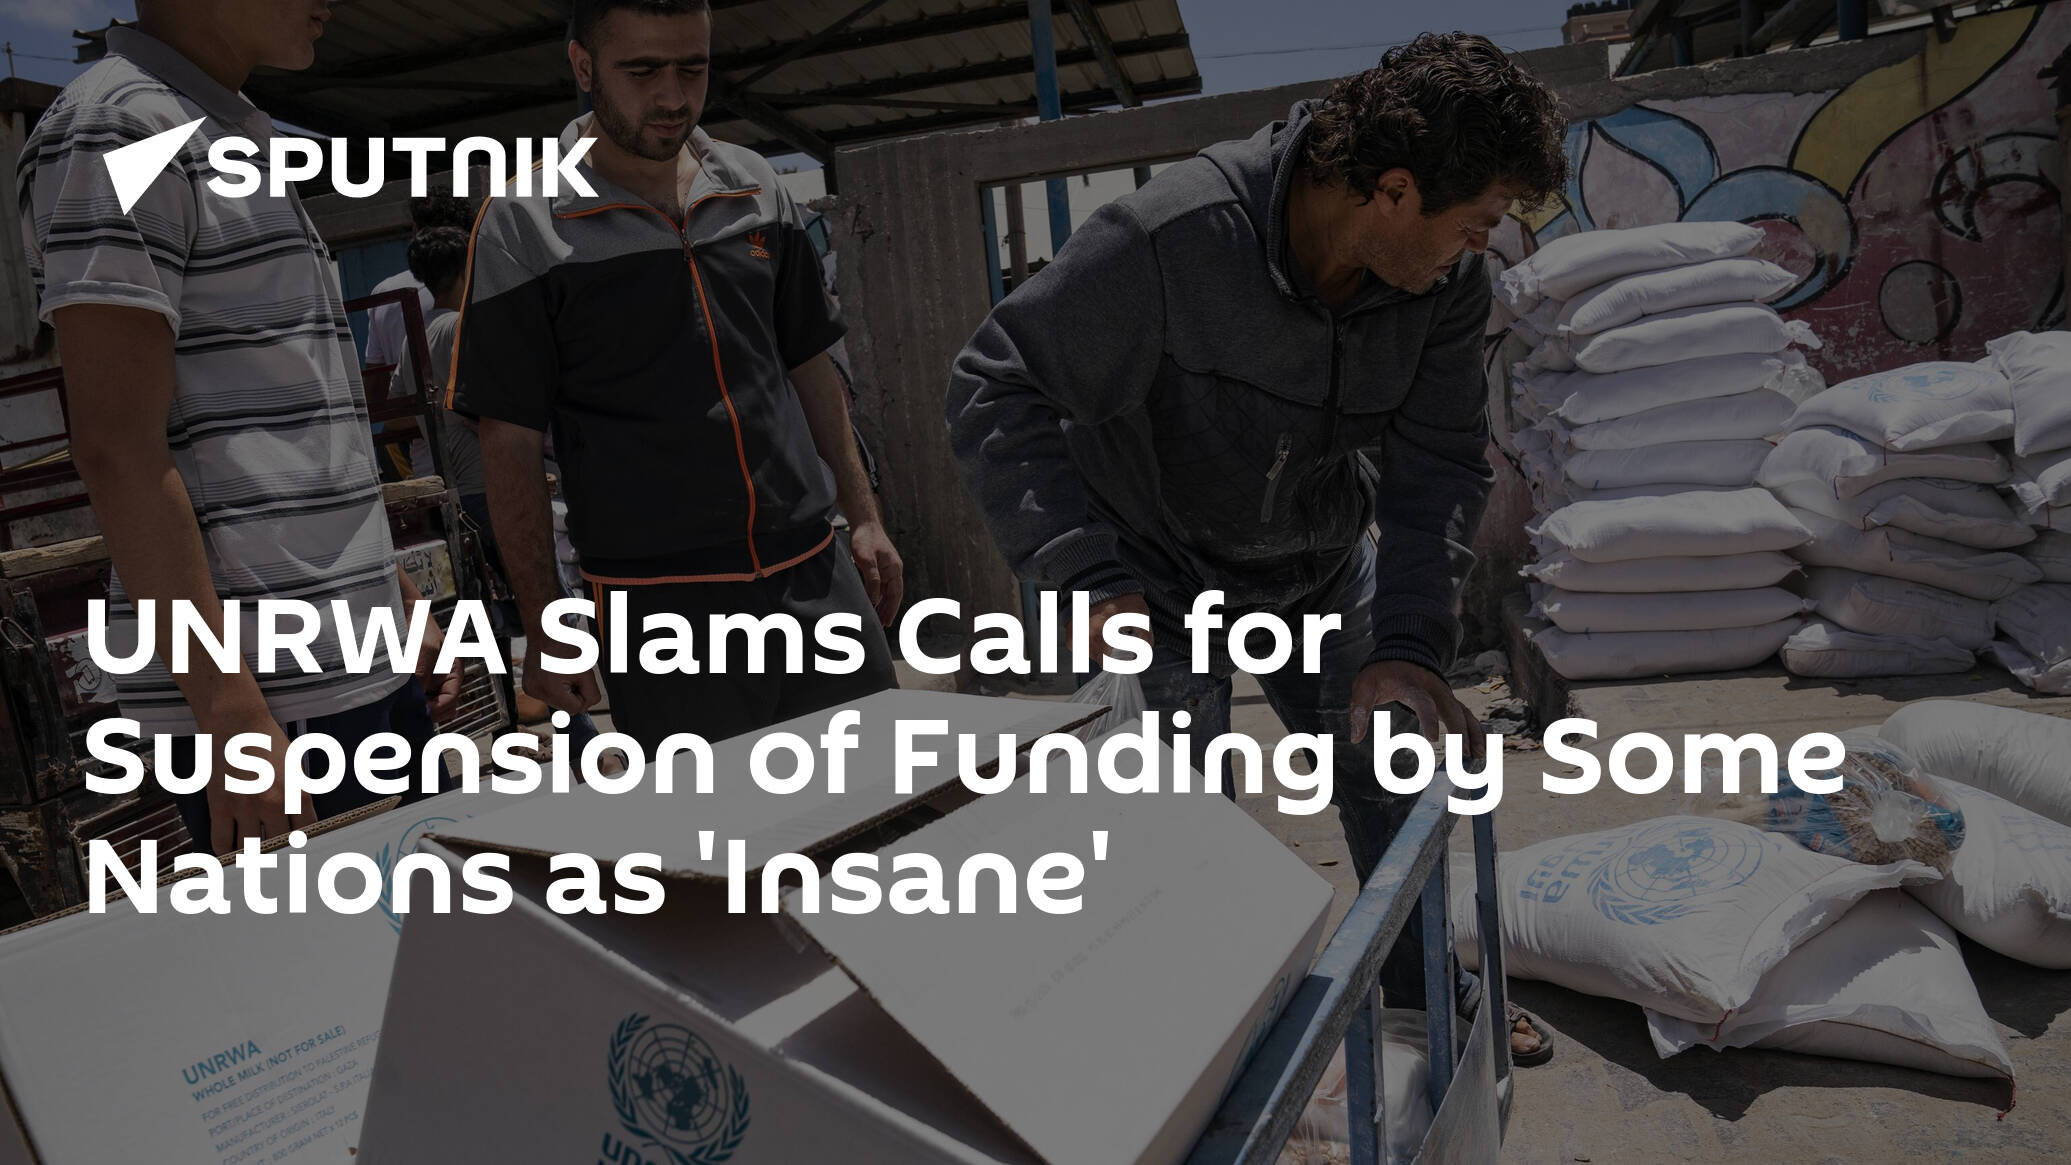 UN Agency for Palestine Refugees Calls Suspension of Funding by Some Nations 'Insane'